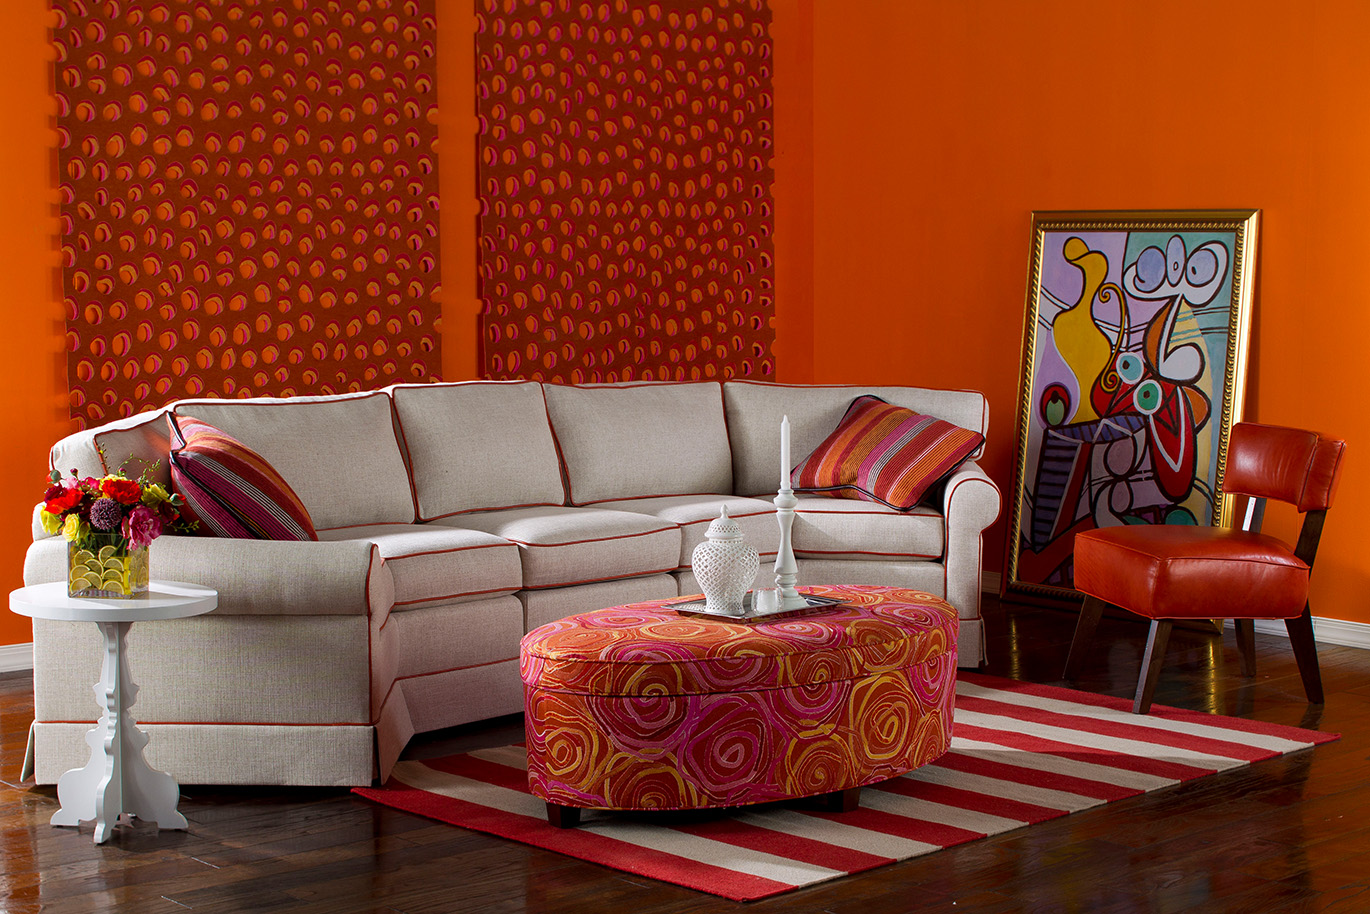 a living room with orange walls and furniture